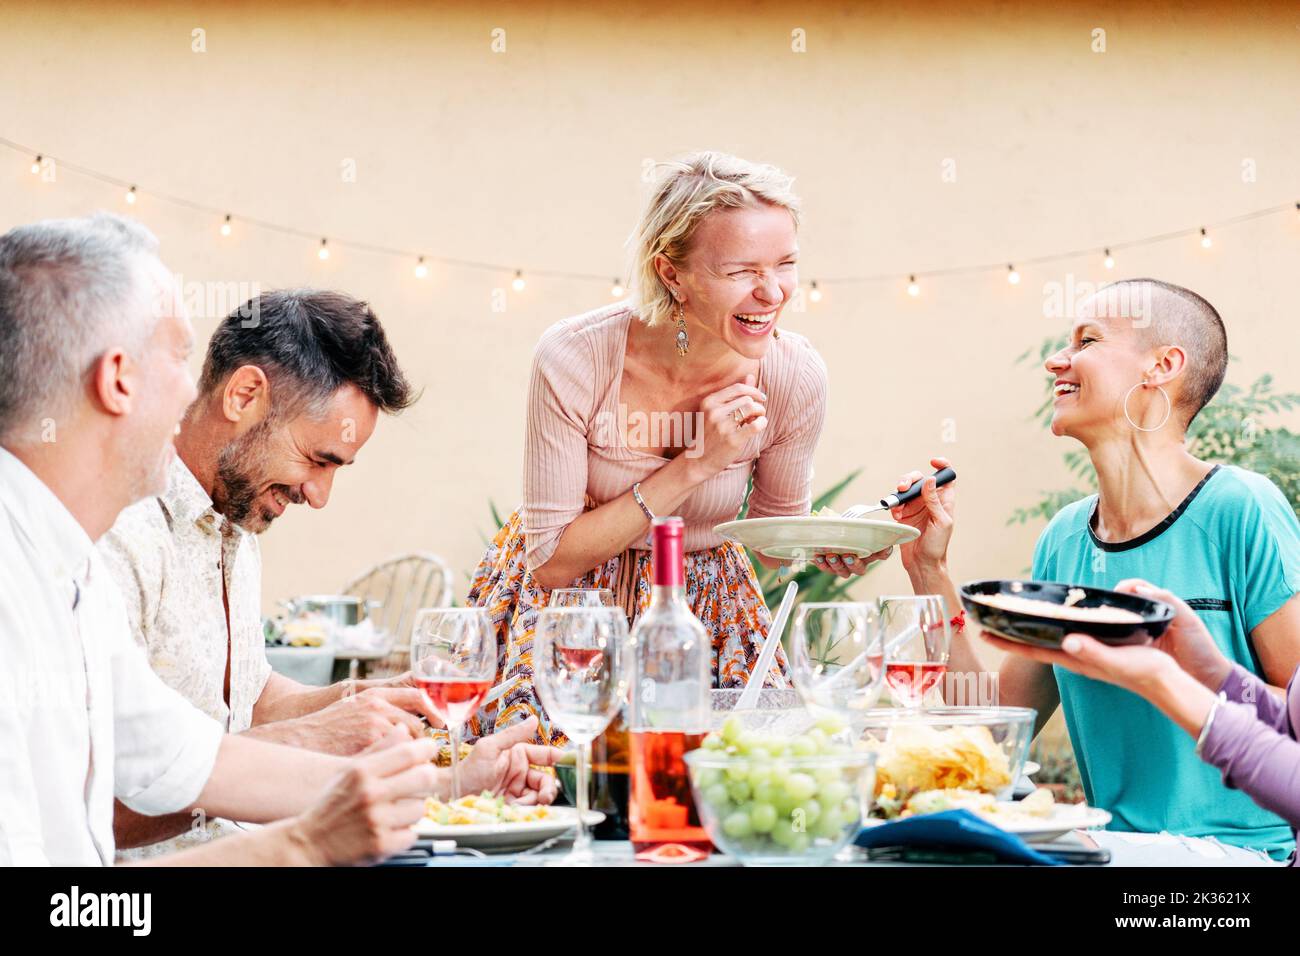 Mature people celebrating a bbq party sharing his food with his friends. Pretty woman brings a salad to the table. Lifestyle concept. Stock Photo